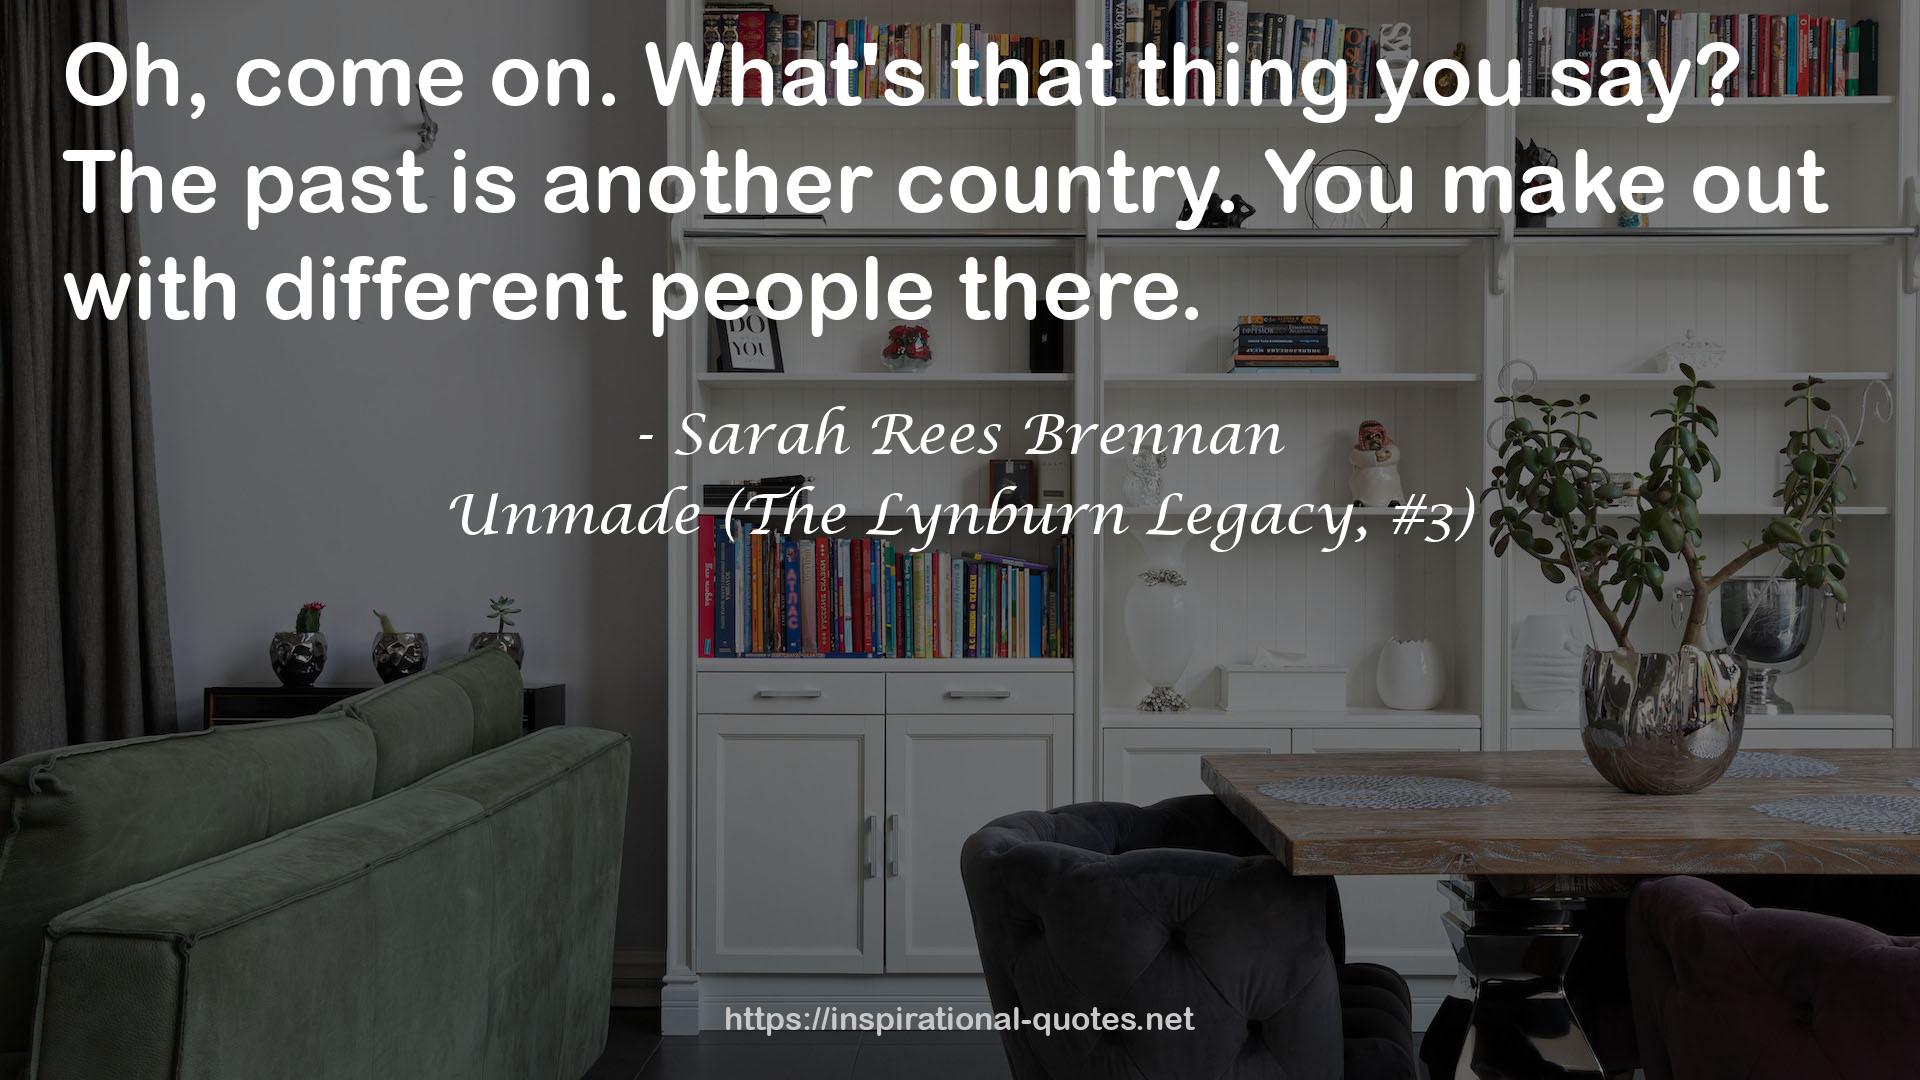 Unmade (The Lynburn Legacy, #3) QUOTES